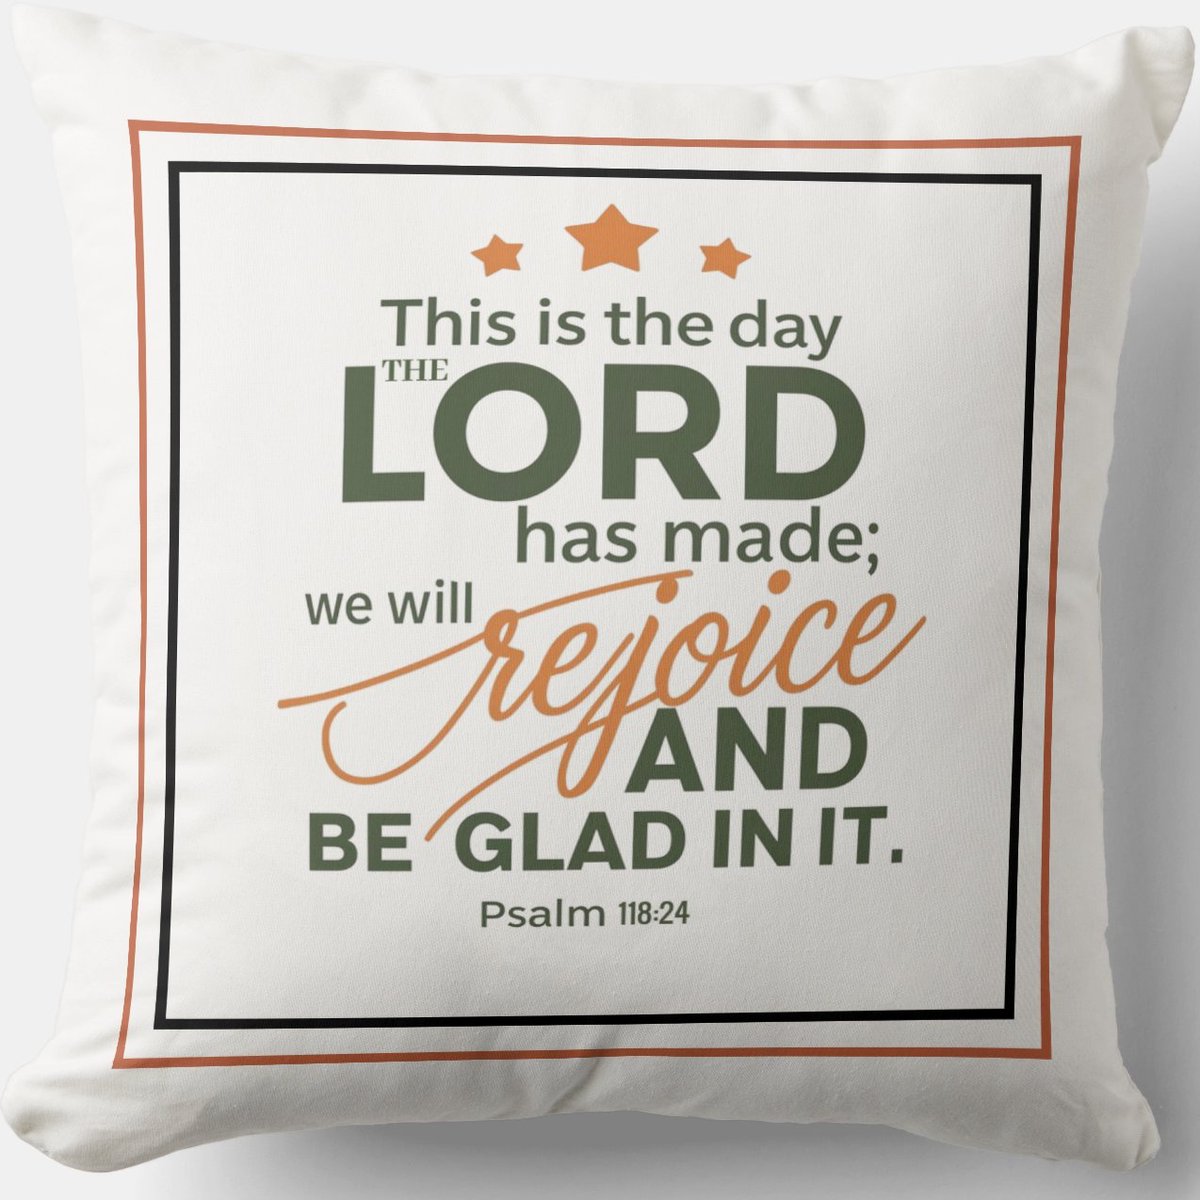 This Is The Day The Lord Has Made Cushion zazzle.com/this_is_the_da… Throw #Pillow #Blessing #JesusChrist #JesusSaves #Jesus #christian #spiritual #Homedecoration #uniquegift #giftideas #MothersDayGifts #giftformom #giftidea #HolySpirit #pillows #giftshop #giftsforher #giftsformom